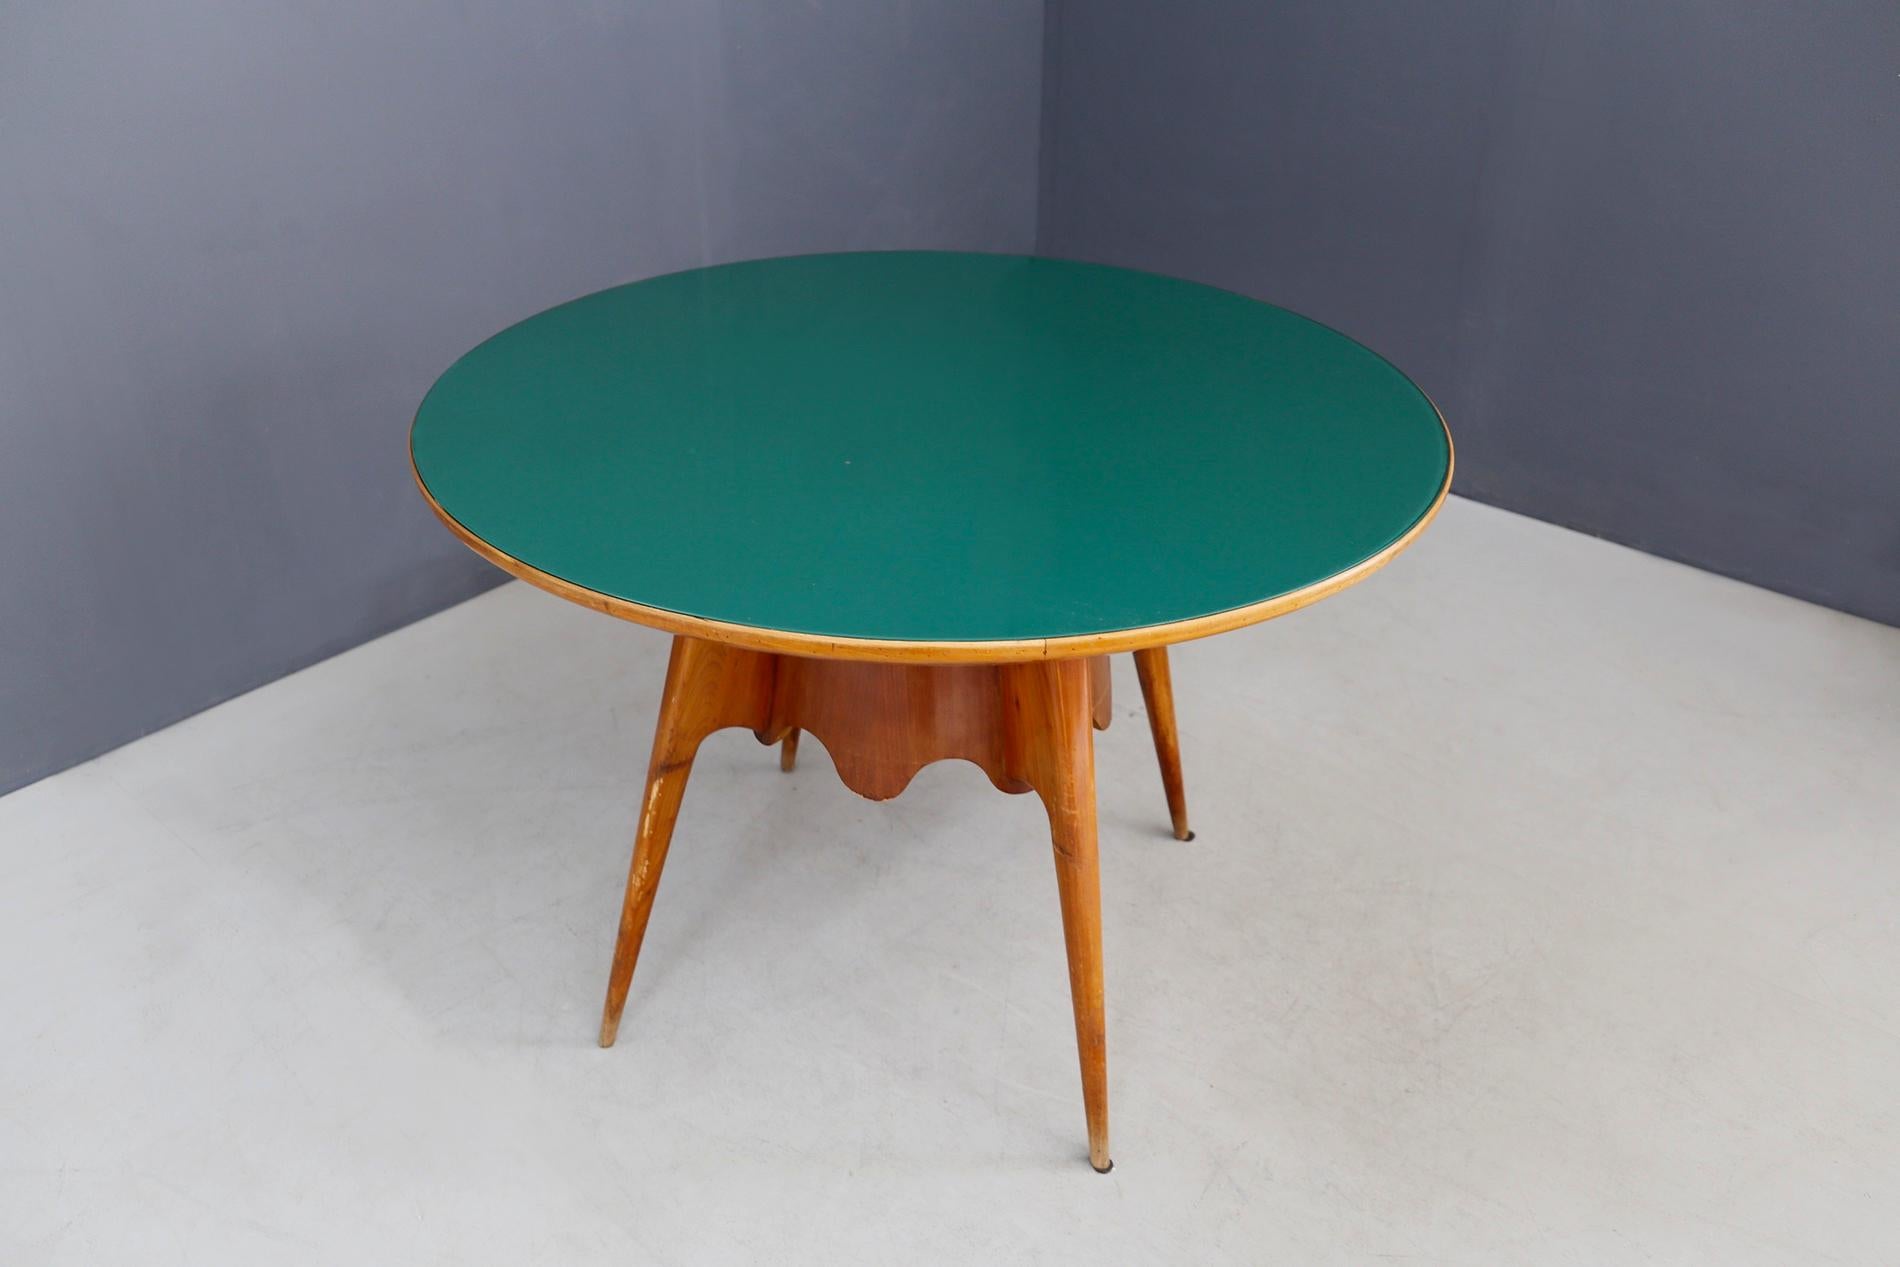 Round dining table designed by Paolo Buffa in 1940. The table has a green glass top in excellent condition.
The structure of the table is made of wood with 4 cone-shaped feet. To enrich its value are its flounces in corrugated wood in the middle of